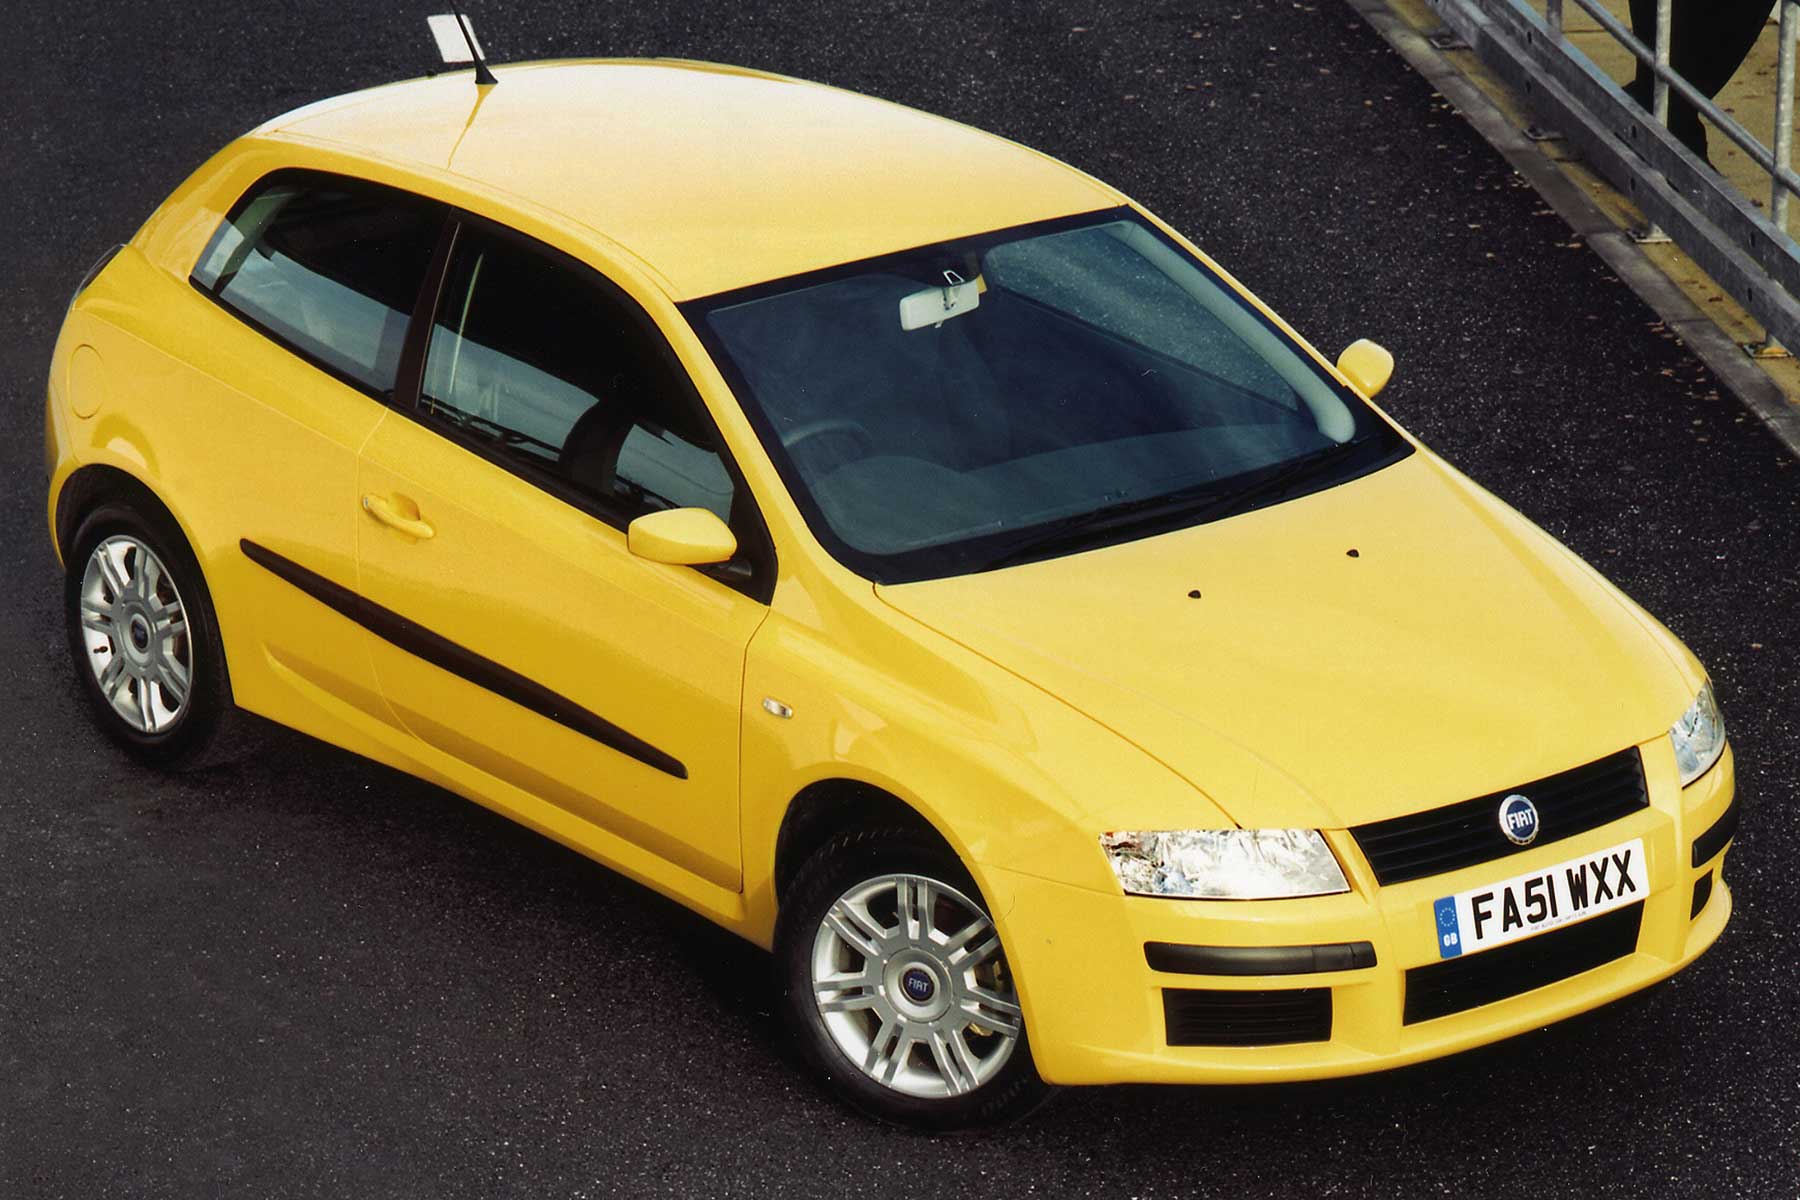 Fiat Stilo one of Europe's biggest lossmaking cars